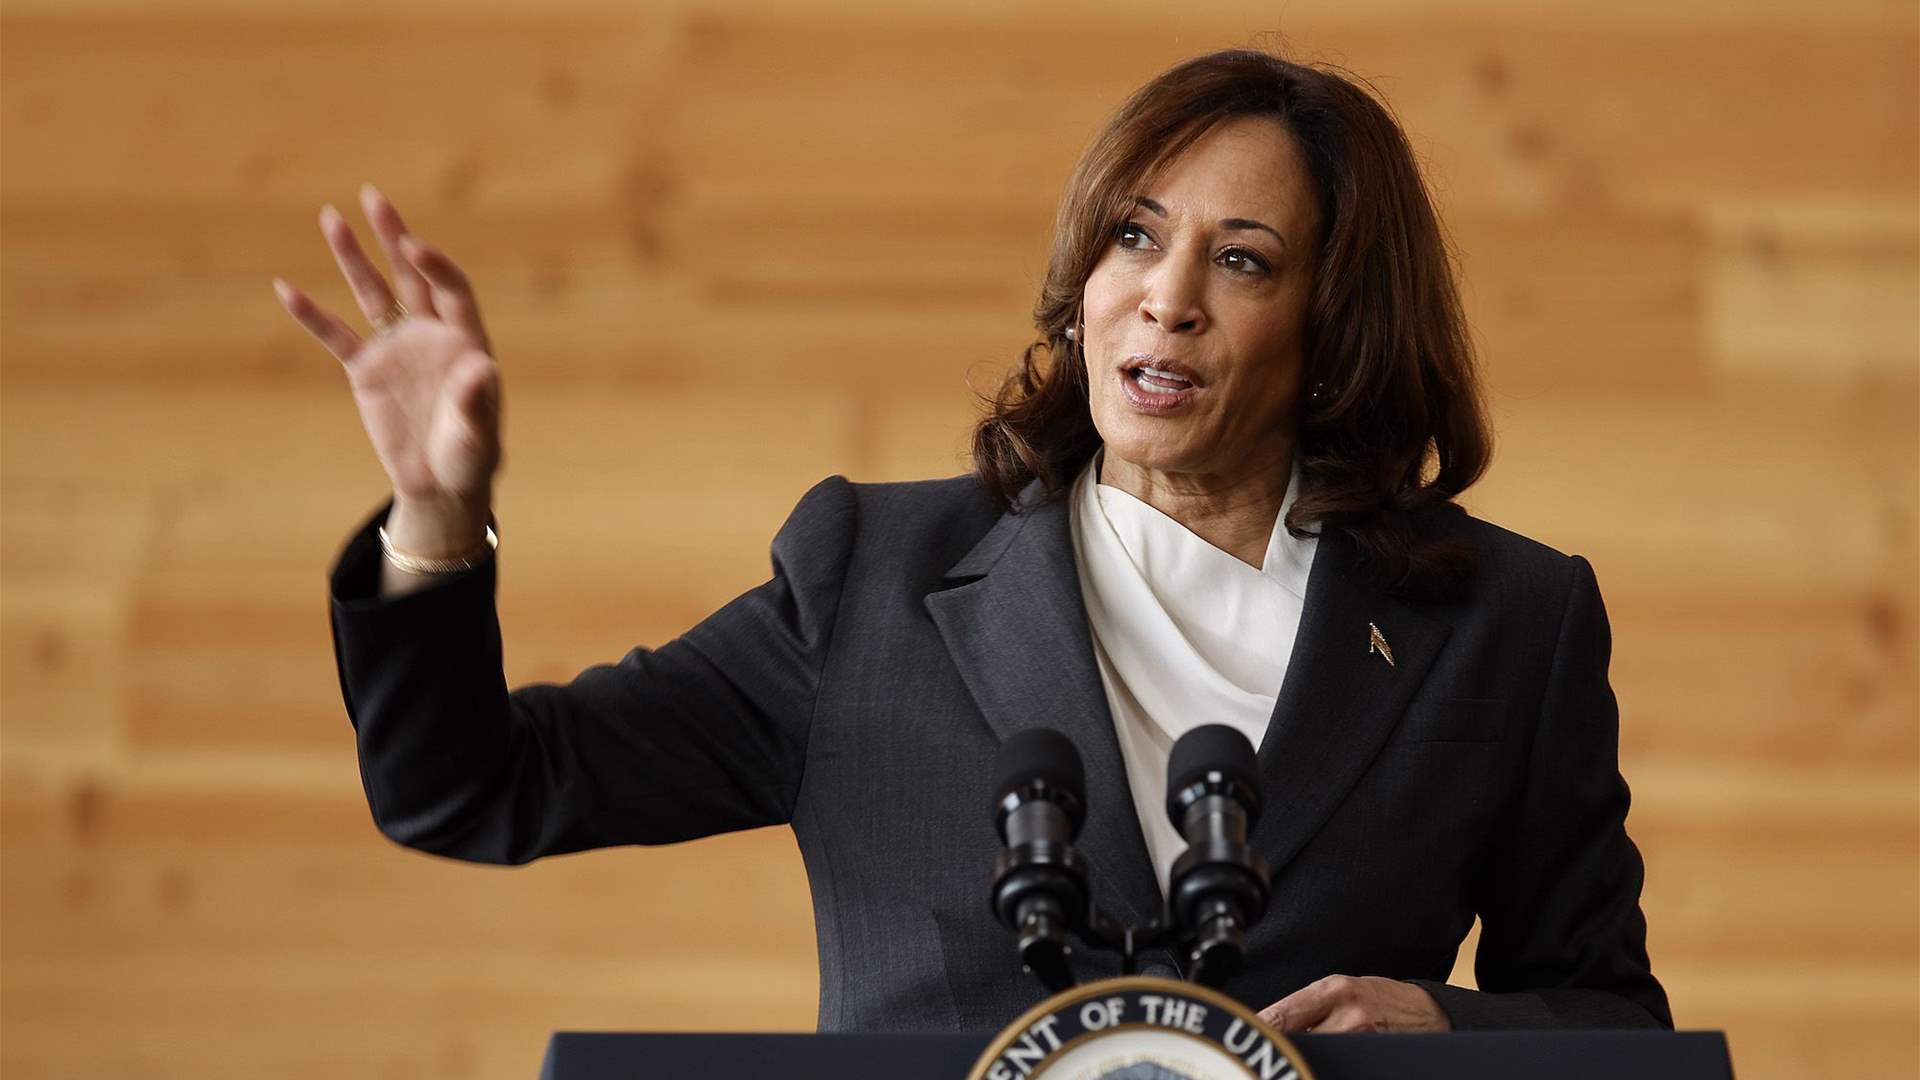 Harris urges Netanyahu to alleviate Gaza&#39;s suffering: &#39;I will not be silent&#39;